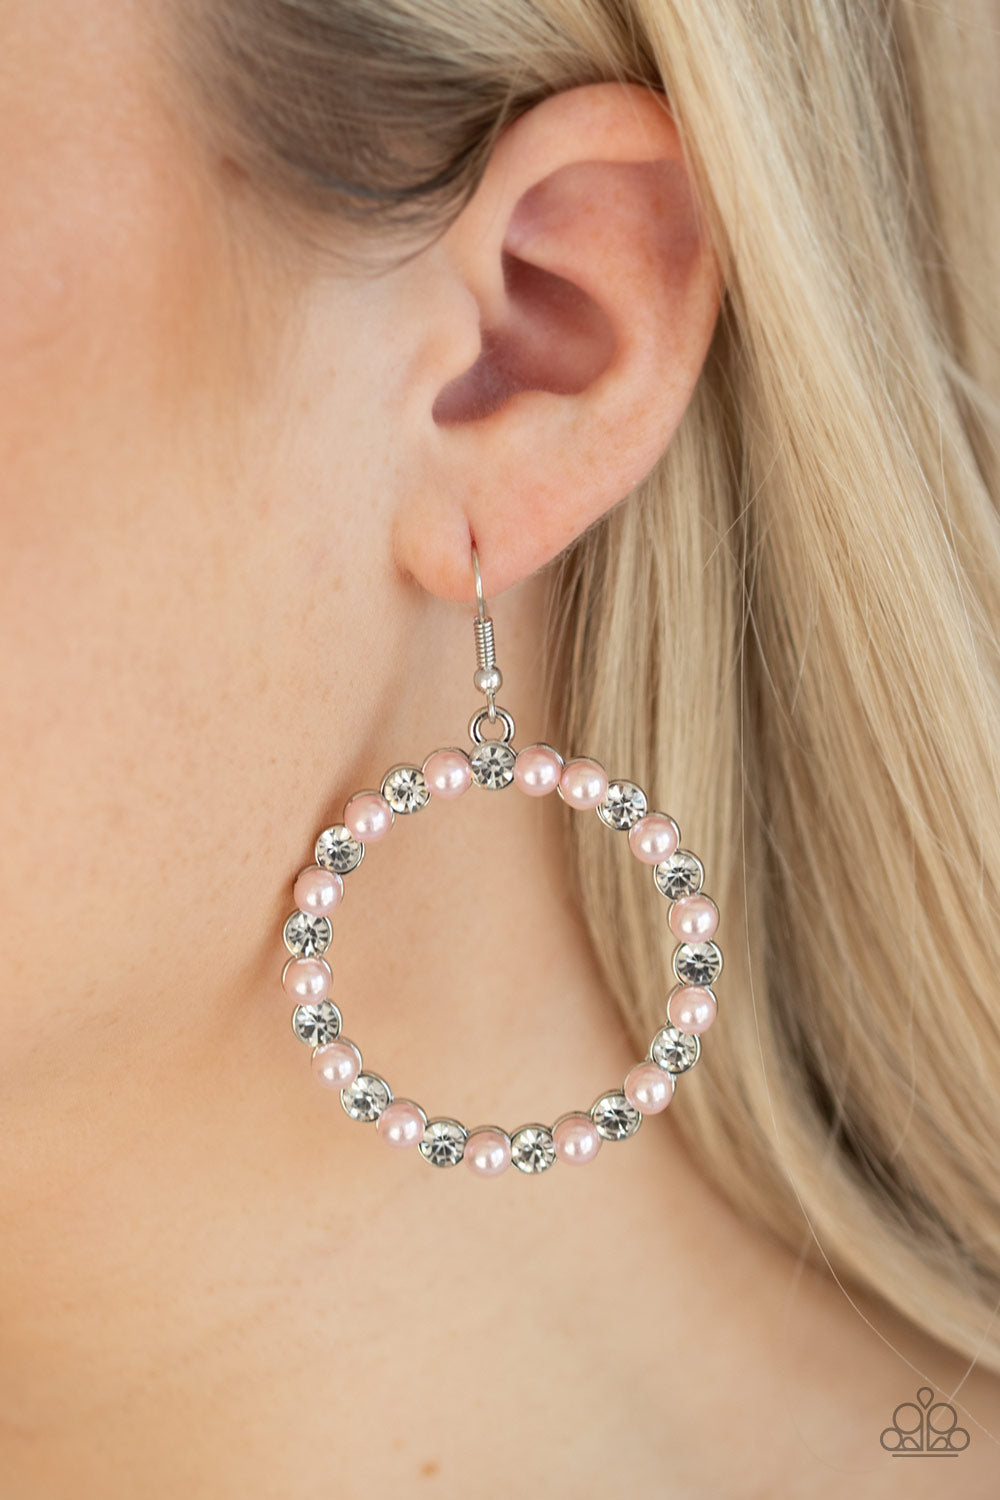 Pearl Palace - Pink Bubbly pink pearls and glassy white rhinestones alternate along the front of a shimmery silver hoop for a timeless look. Earring attaches to a standard fishhook fitting. All Paparazzi Accessories are lead free and nickel free!  Sold as one pair of earrings.